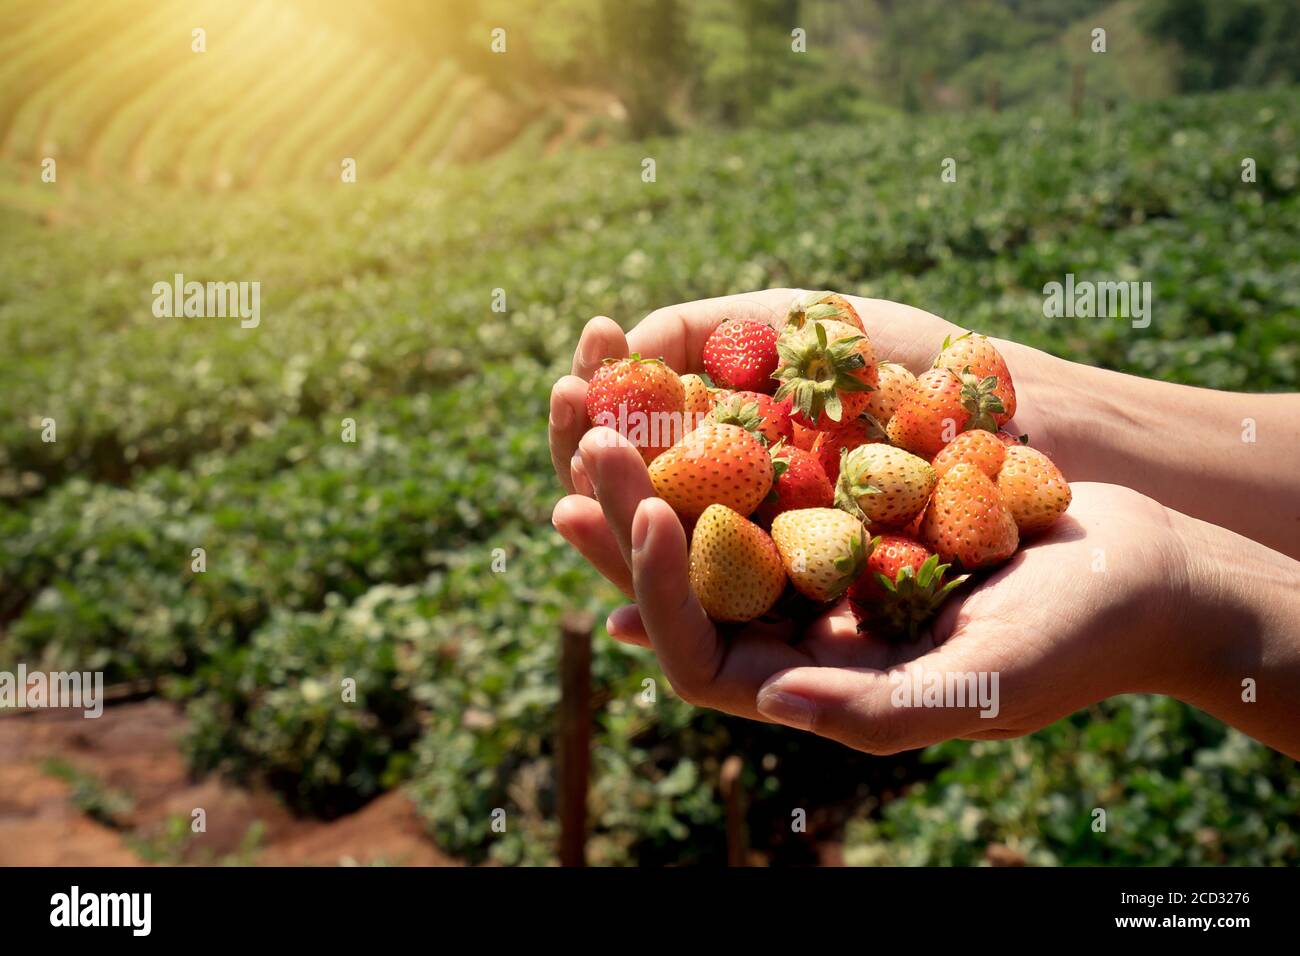 Strawberry fresh fruits in a woman's hands with strawberry field background Stock Photo